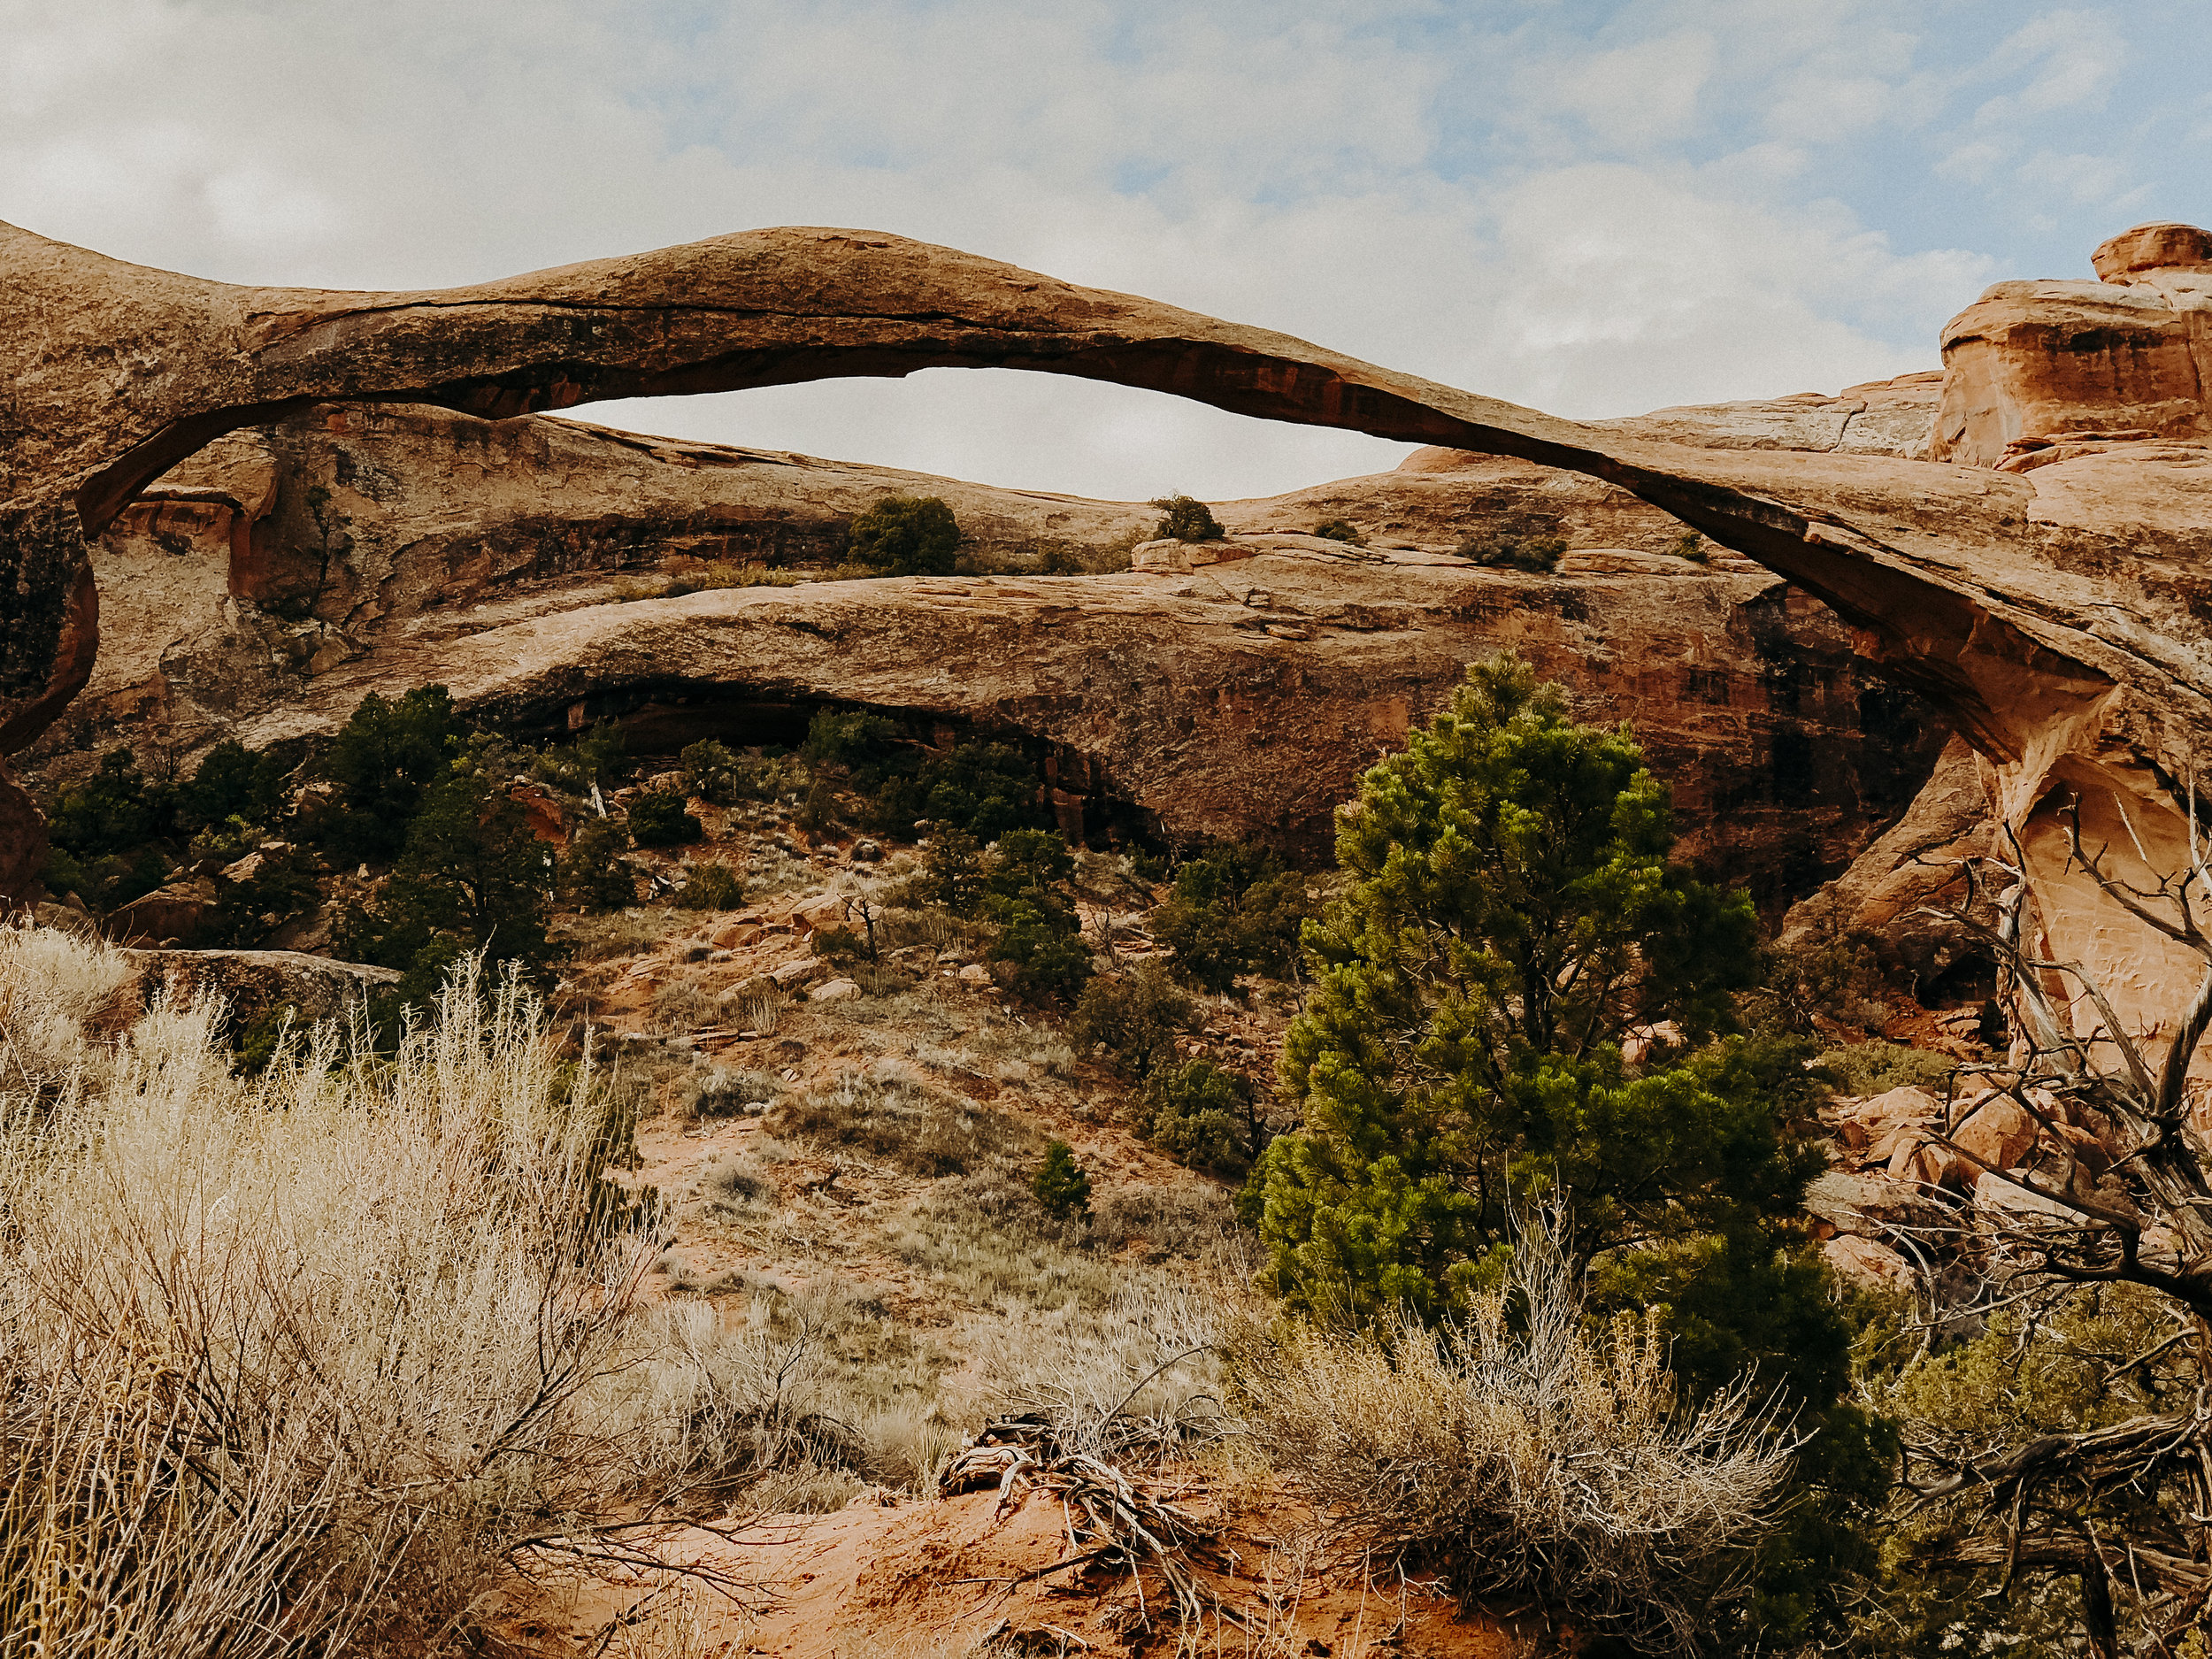 visit-arches-national-park-what-to-do-6.jpg